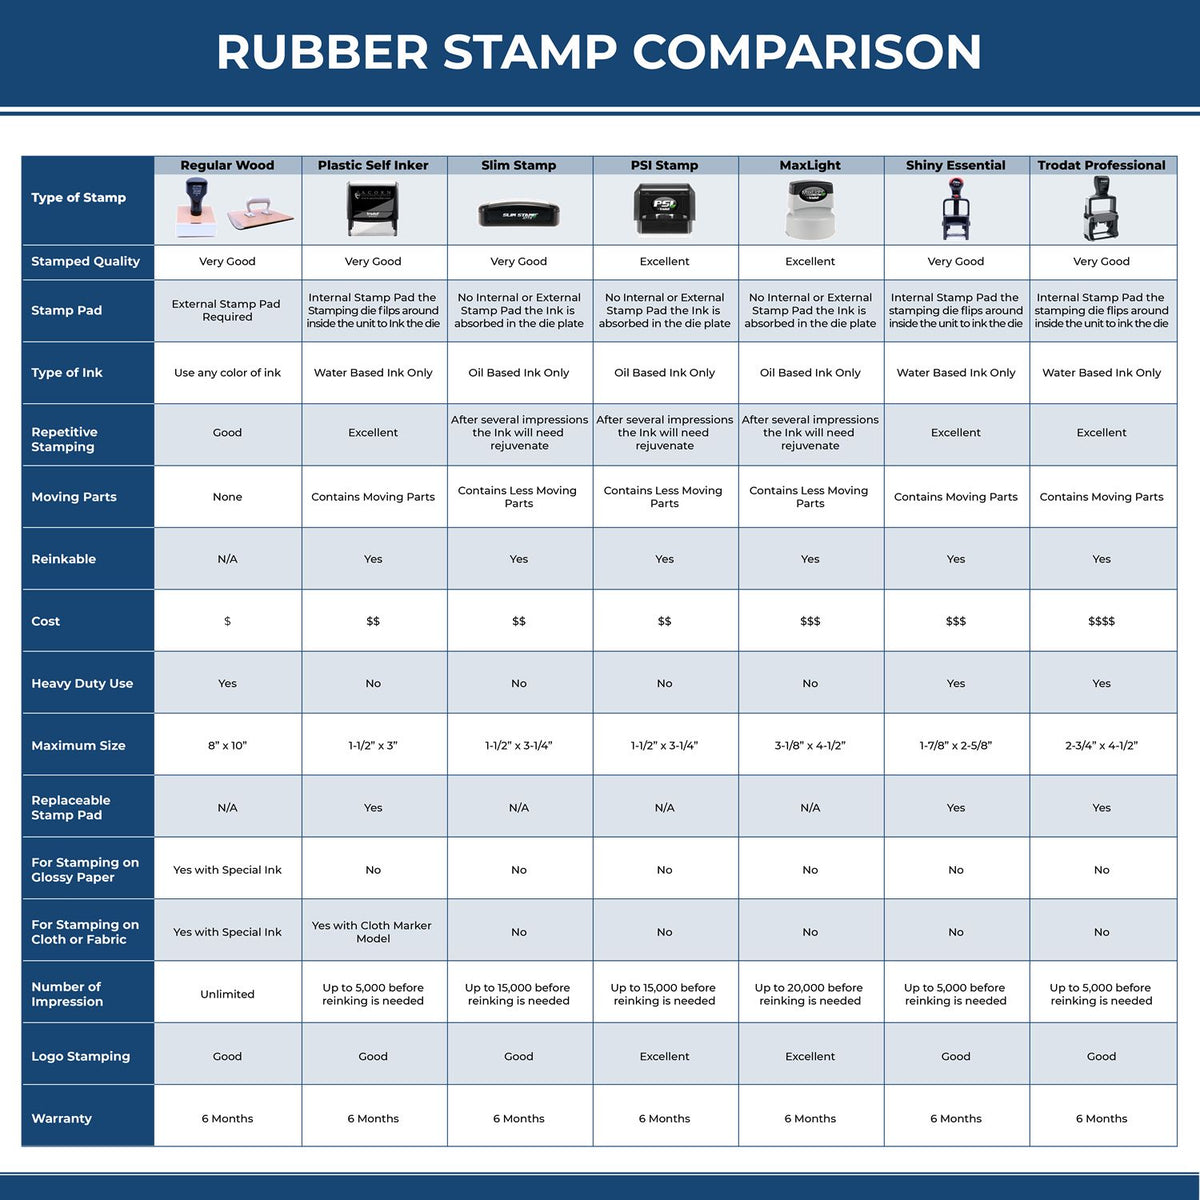 Large Hot Document Rubber Stamp 4606R Rubber Stamp Comparison